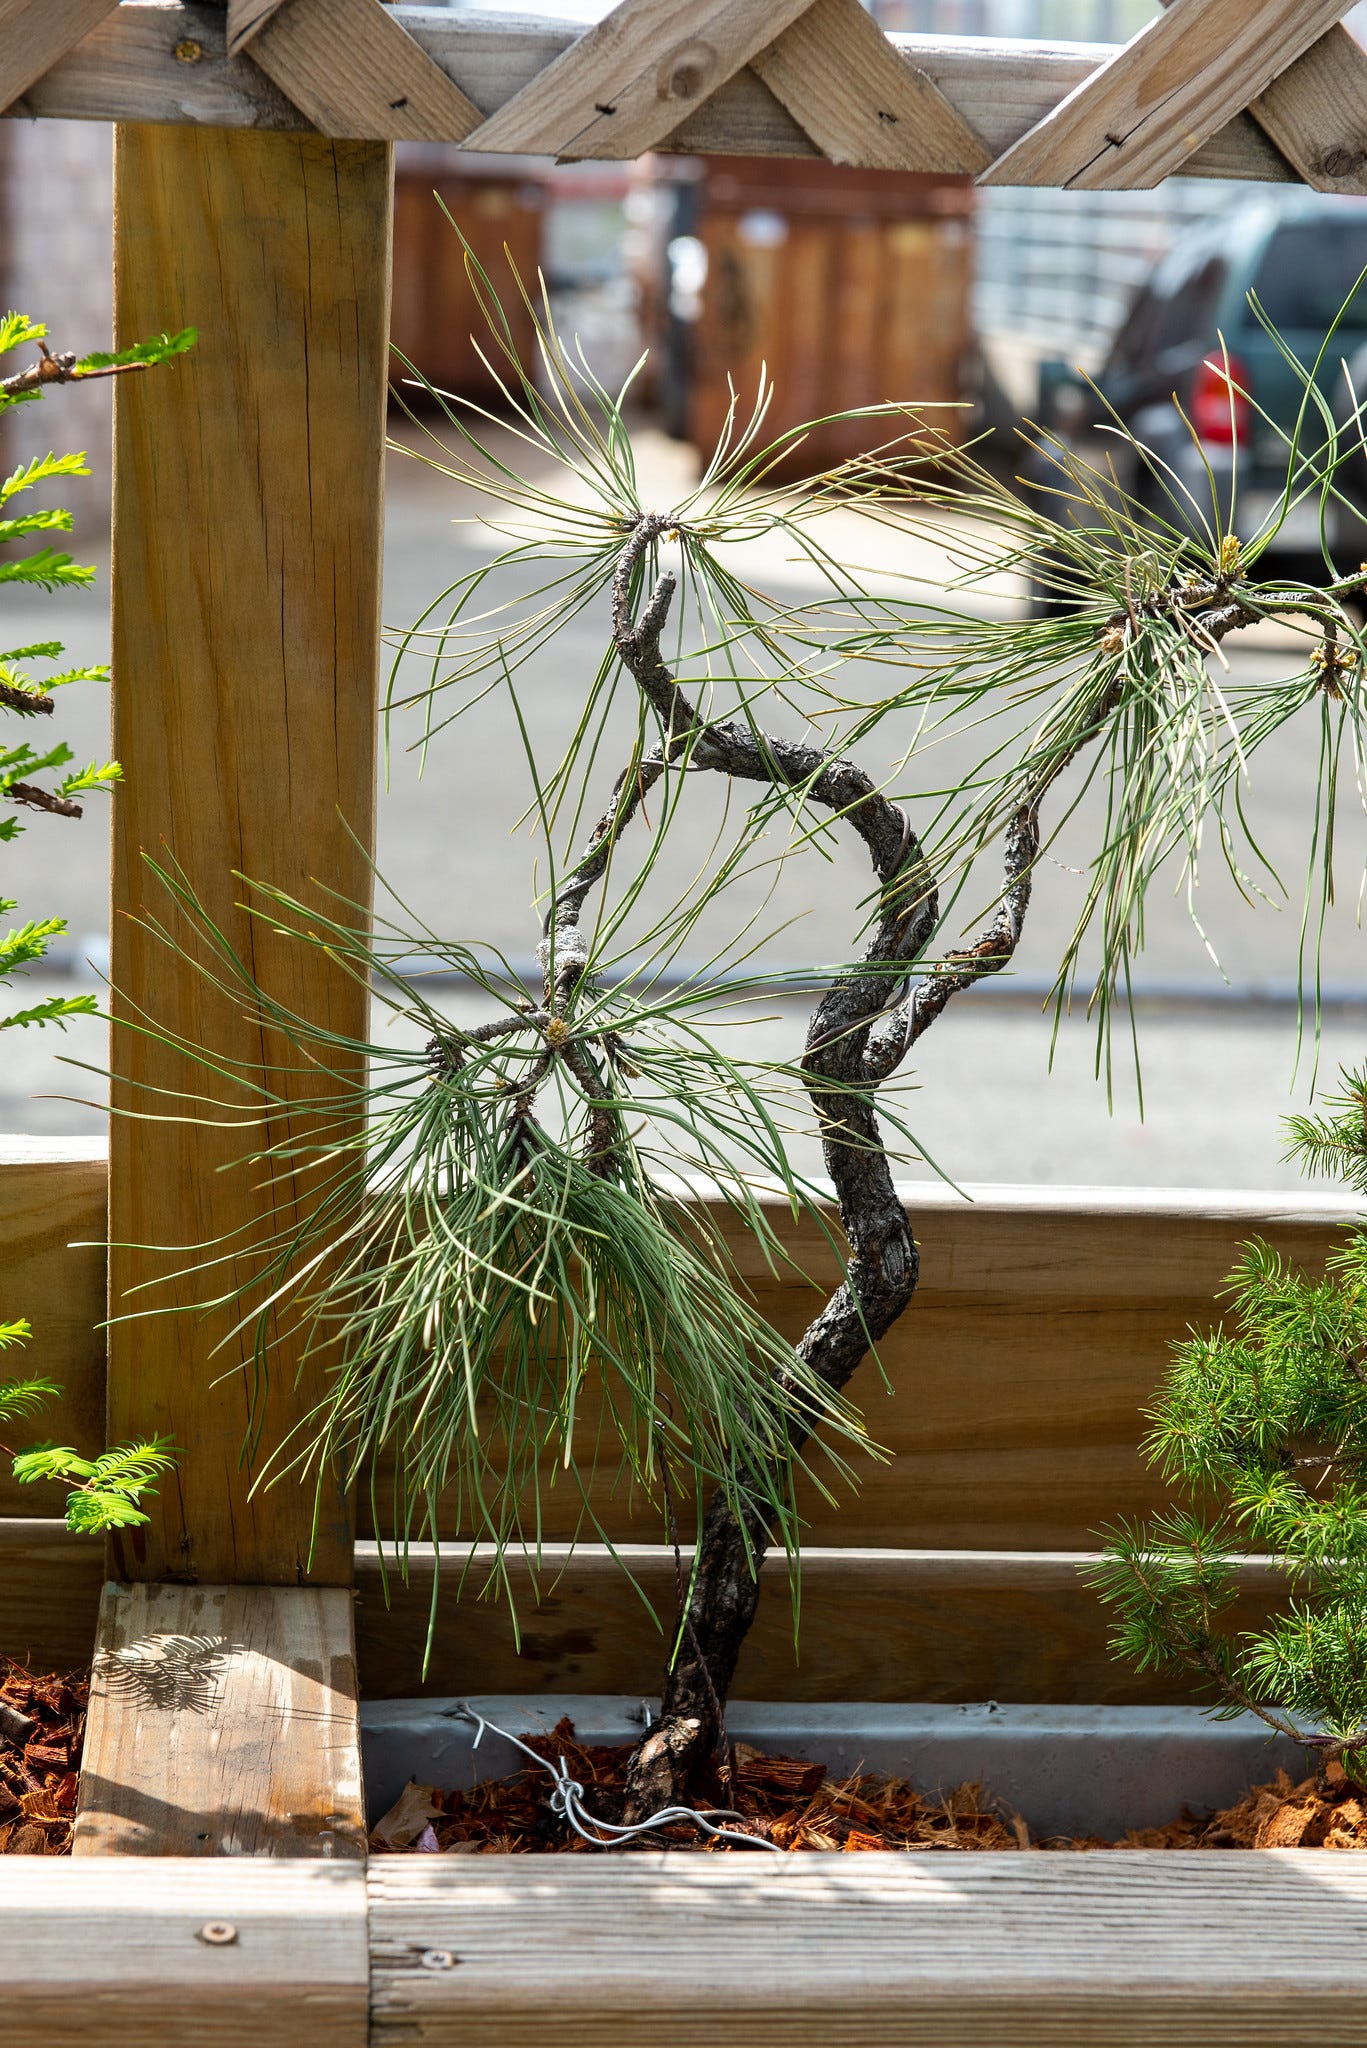 ID: Photo of a contorted ponderosa pine bonsai outdoors in a planter